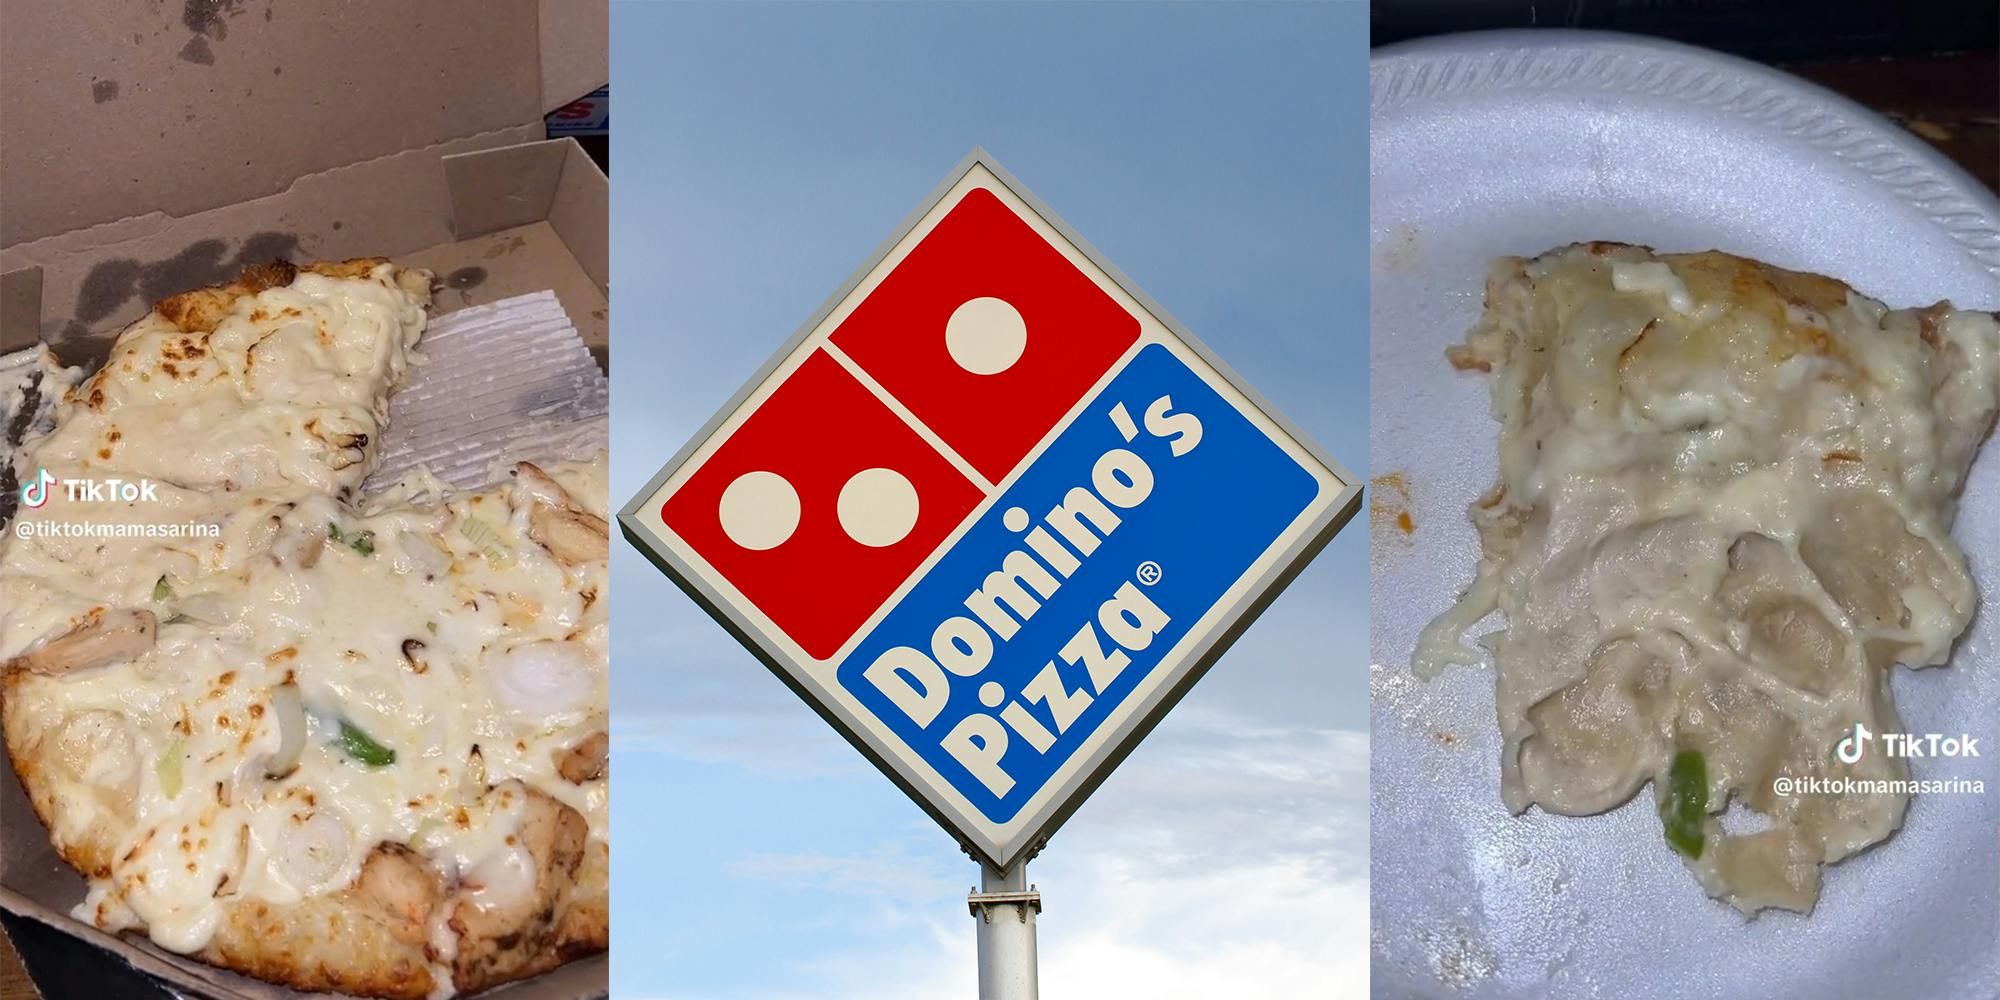 Customer says she was served raw pizza after spending $96 at Domino's